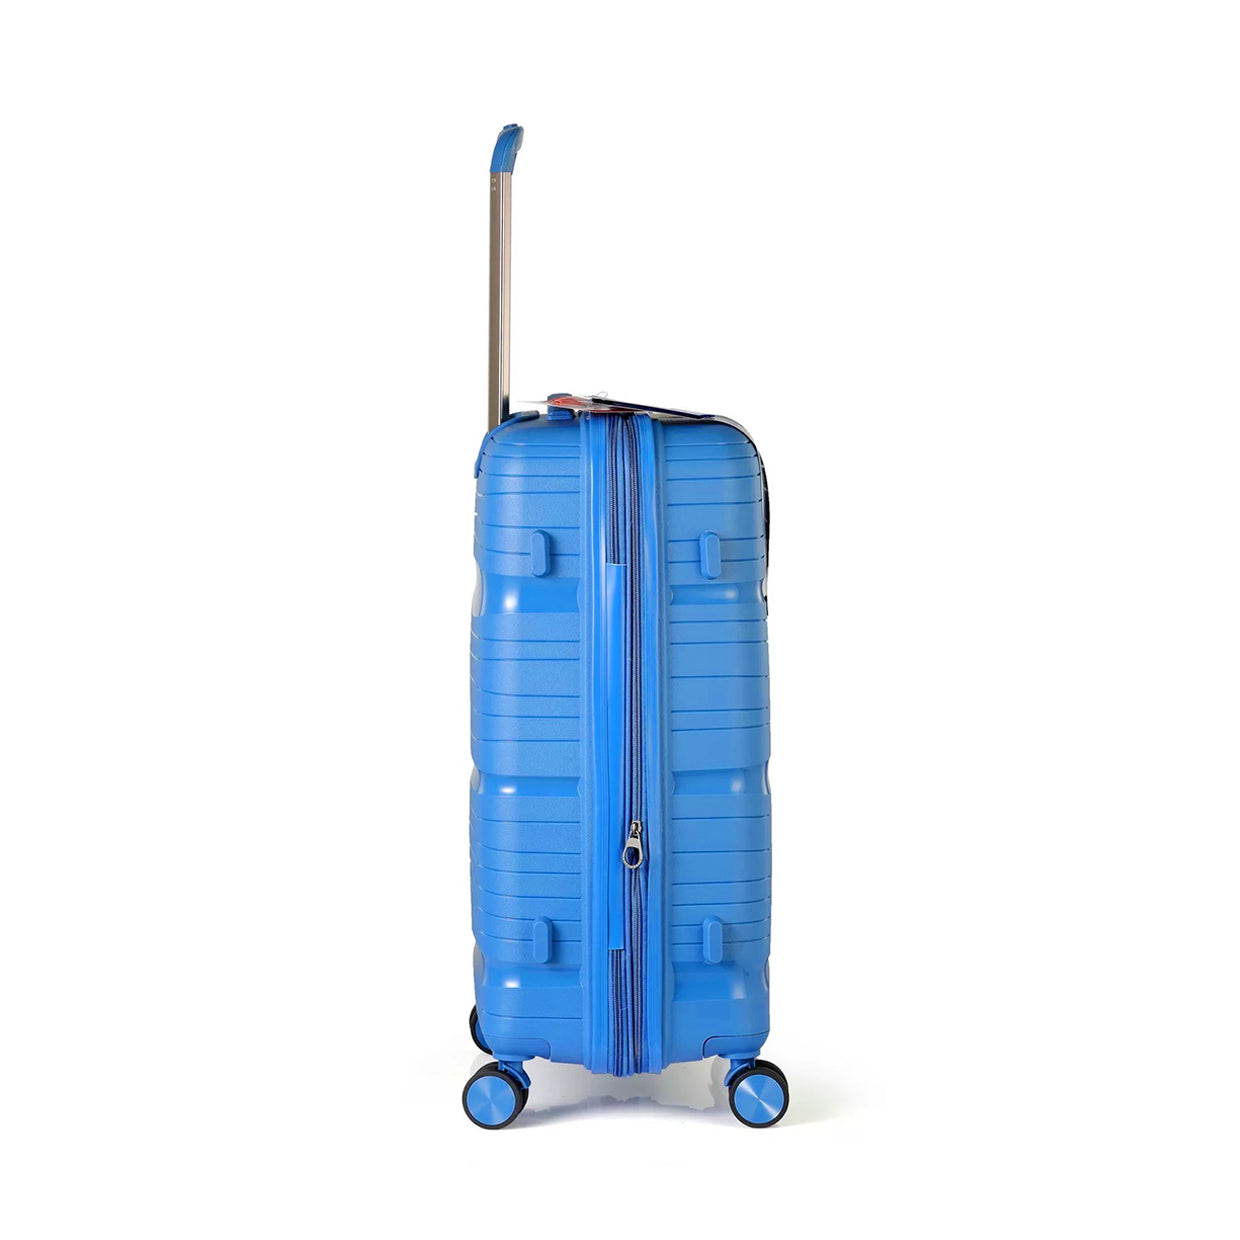 28" Sky Blue Colour Royal PP Luggage Lightweight Hard Case Trolley Bag with Double Spinner Wheel